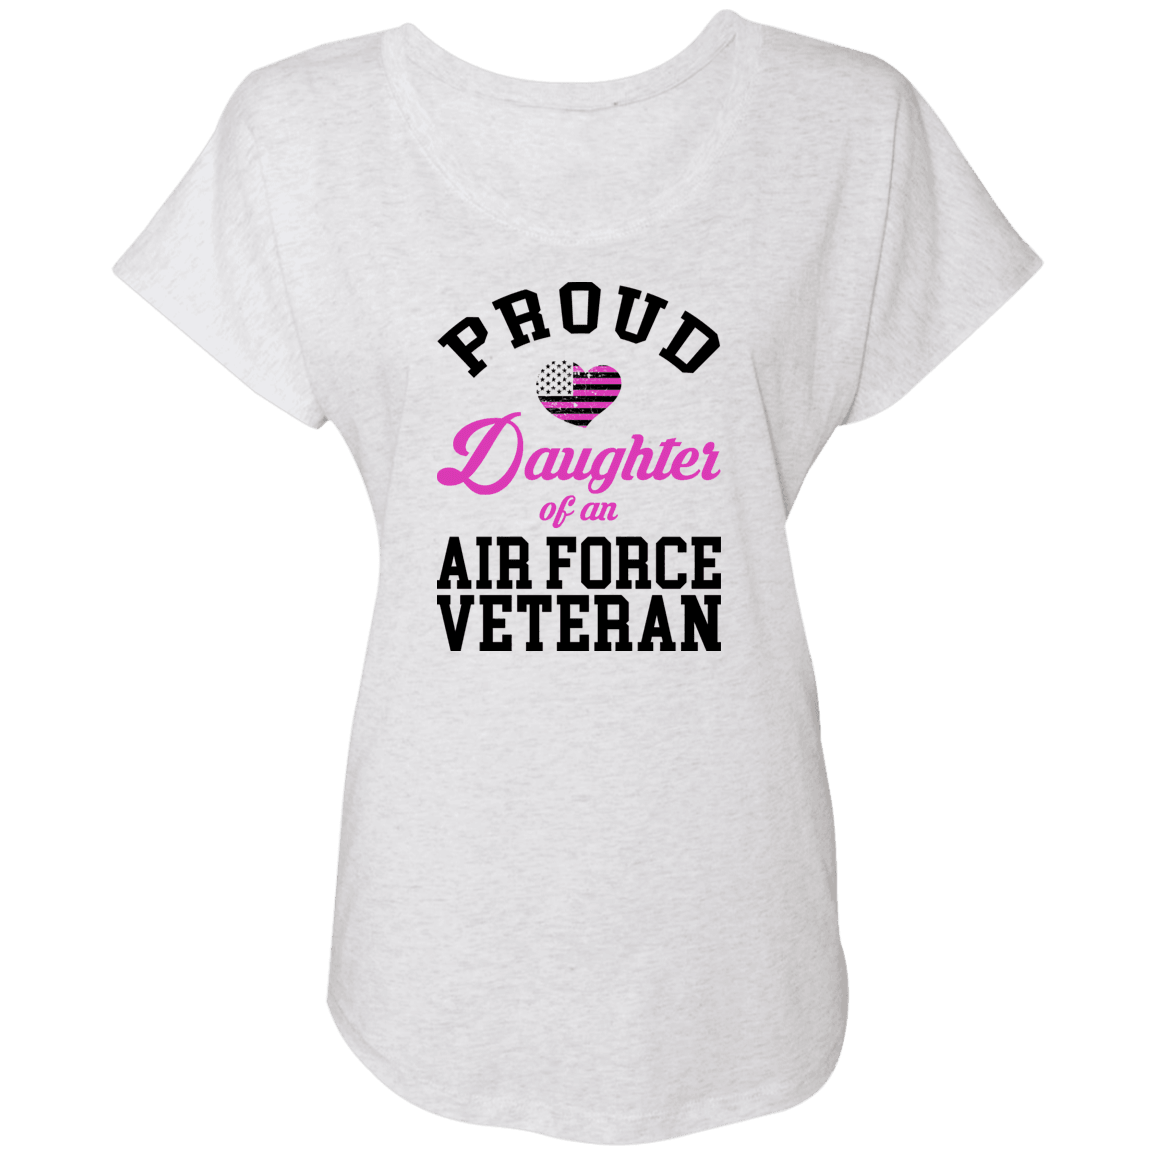 Designs by MyUtopia Shout Out:Proud Daughter of an Air Force Veteran Ladies' Triblend Dolman Shirt,X-Small / Heather White,Ladies T-Shirts